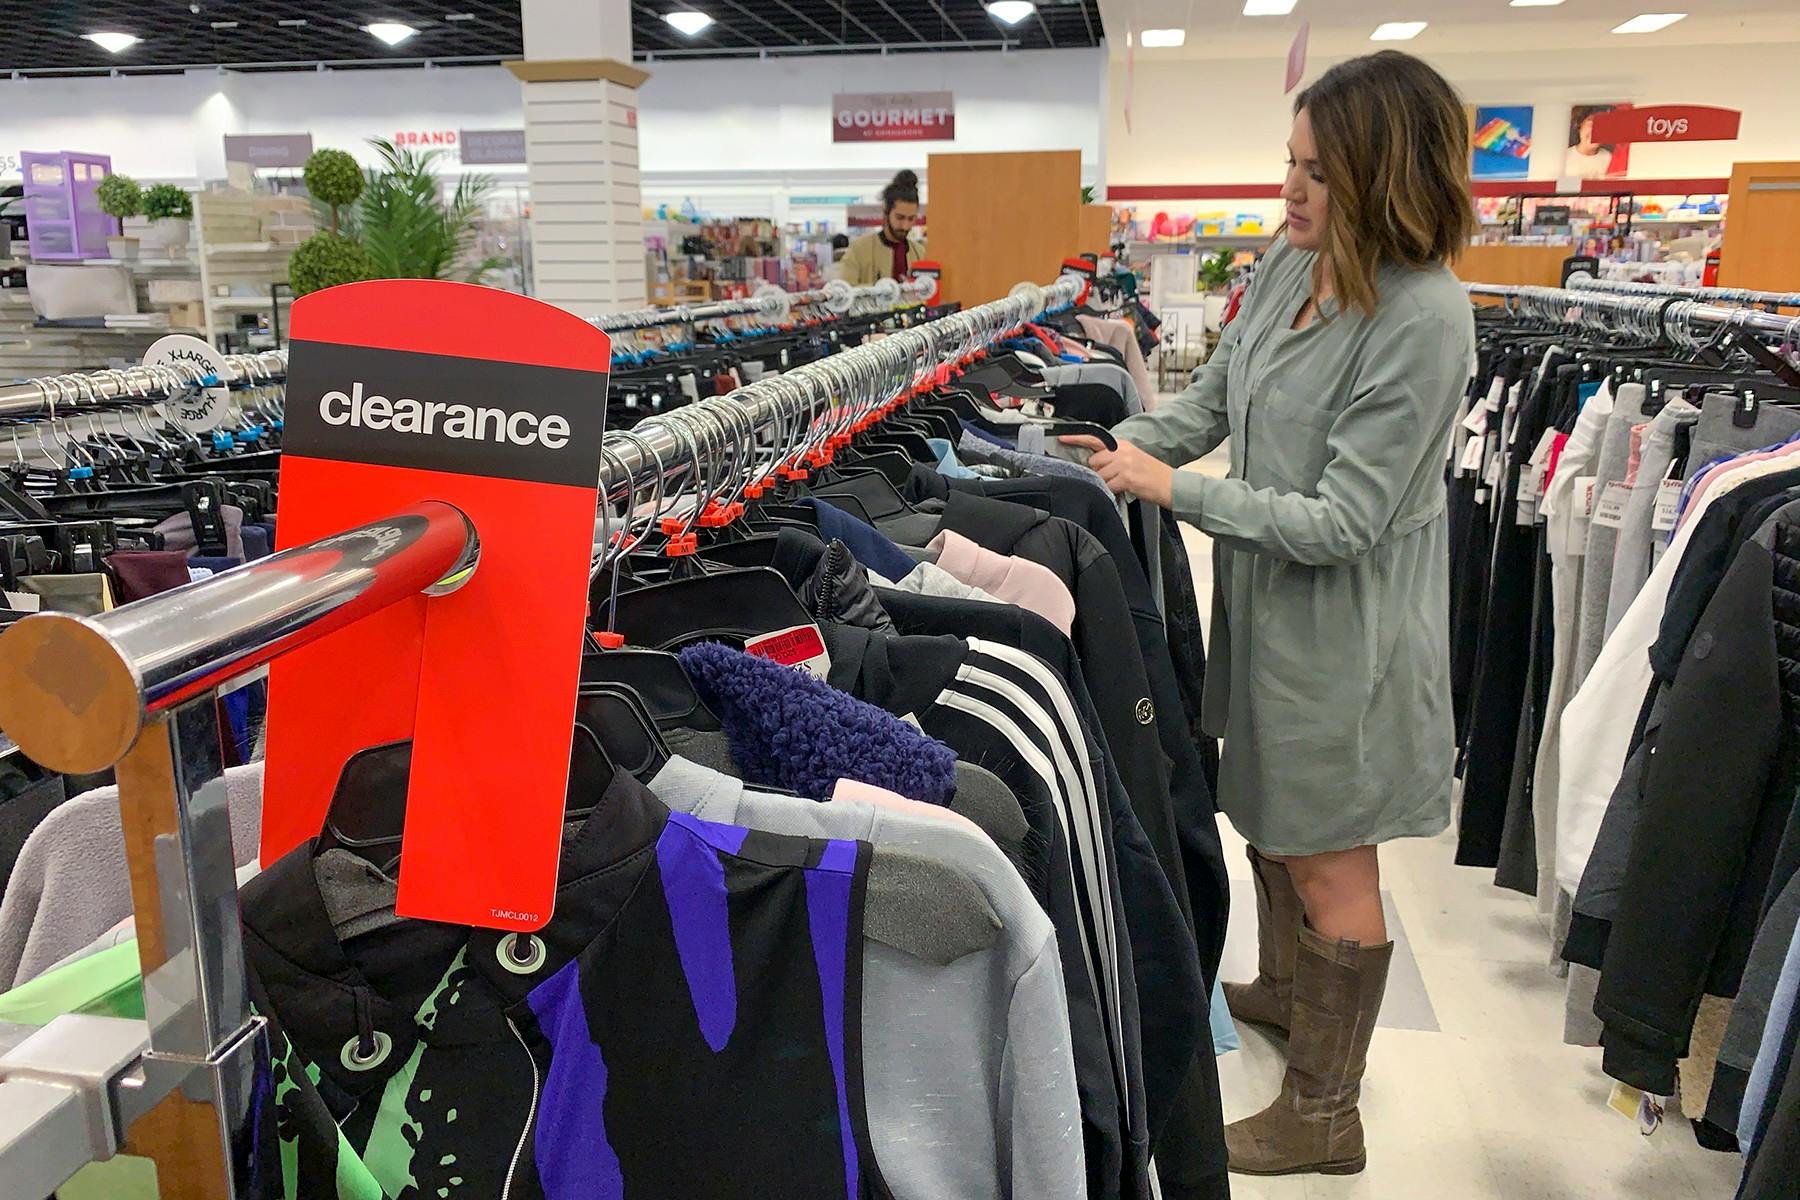 25 Secrets Every Nordstrom Rack Lover Should Know - The Krazy Coupon Lady